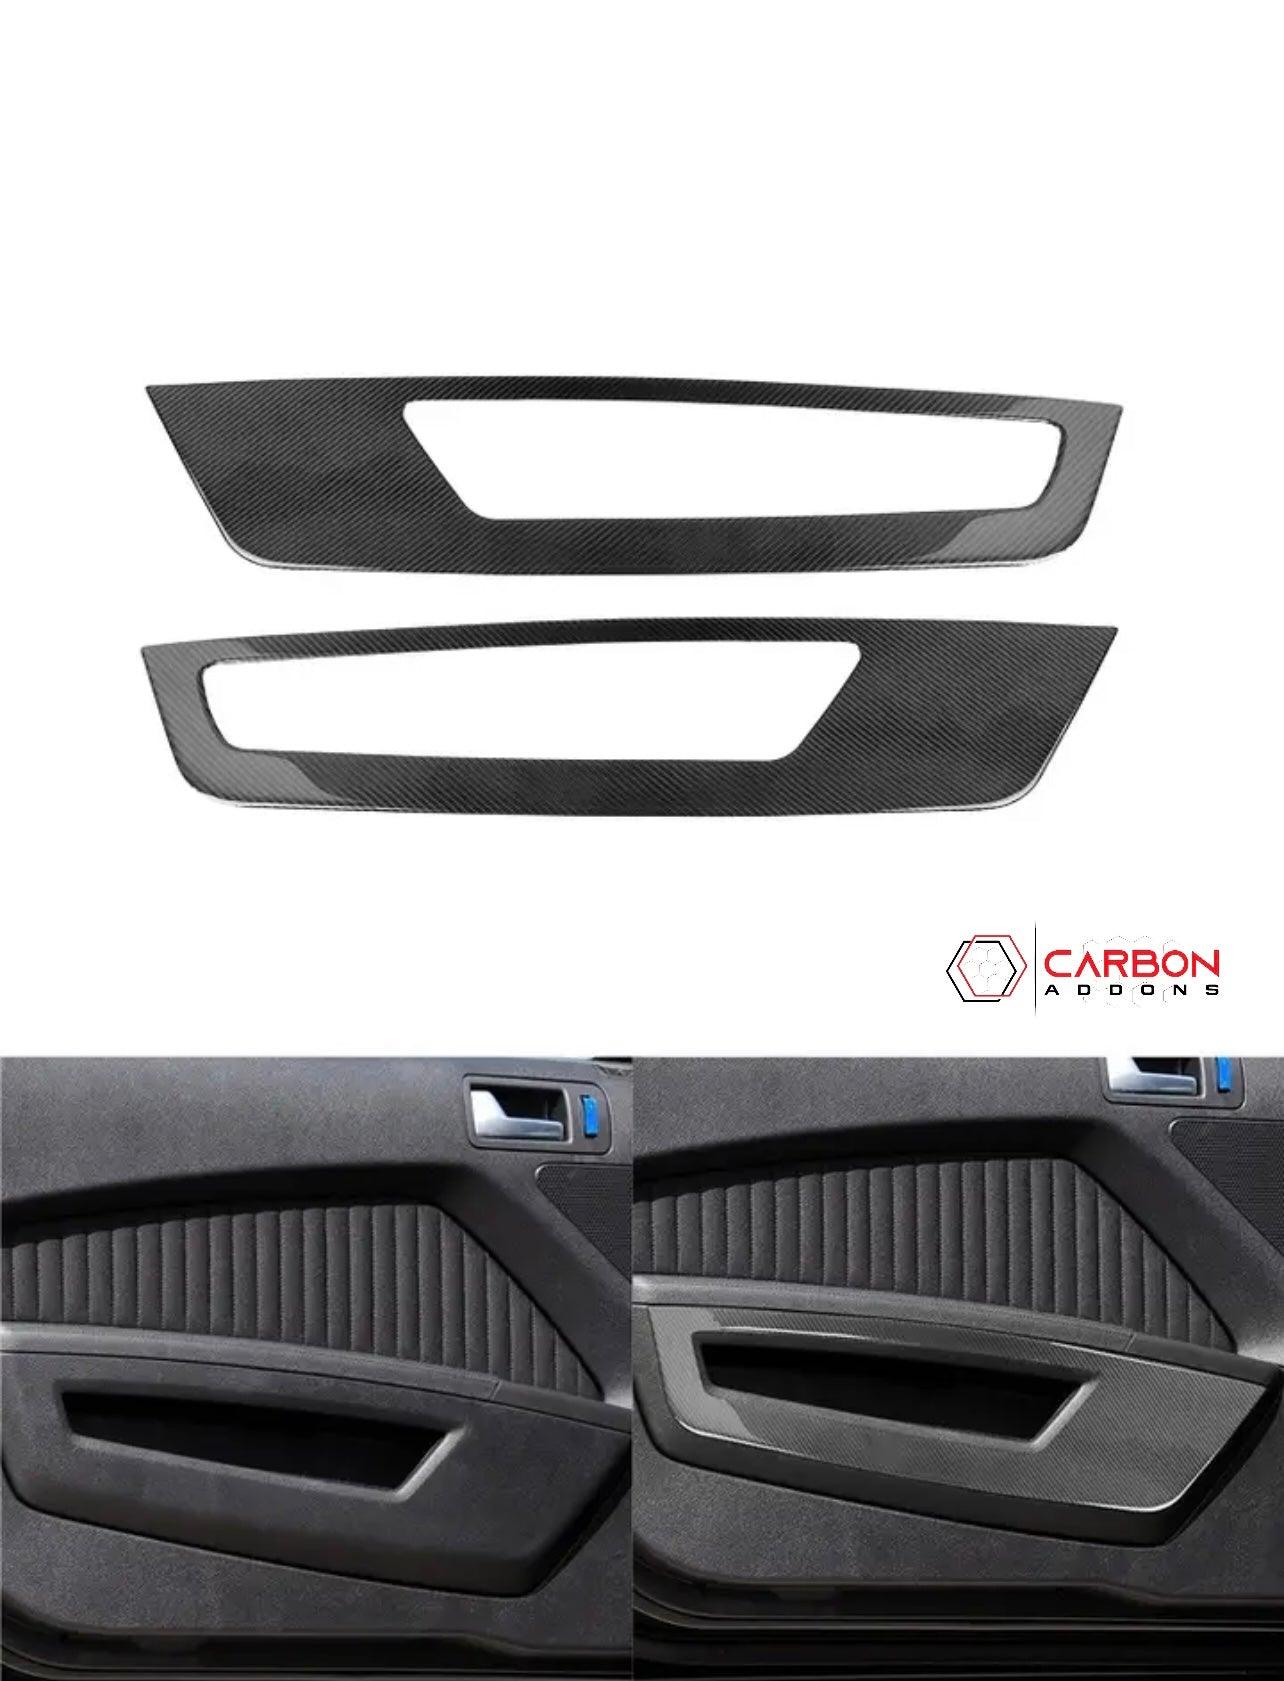 [2pcs] Real Carbon Fiber Front Door Panel Trim Overlay For Ford Mustang 2010-2014 - carbonaddons Carbon Fiber Parts, Accessories, Upgrades, Mods